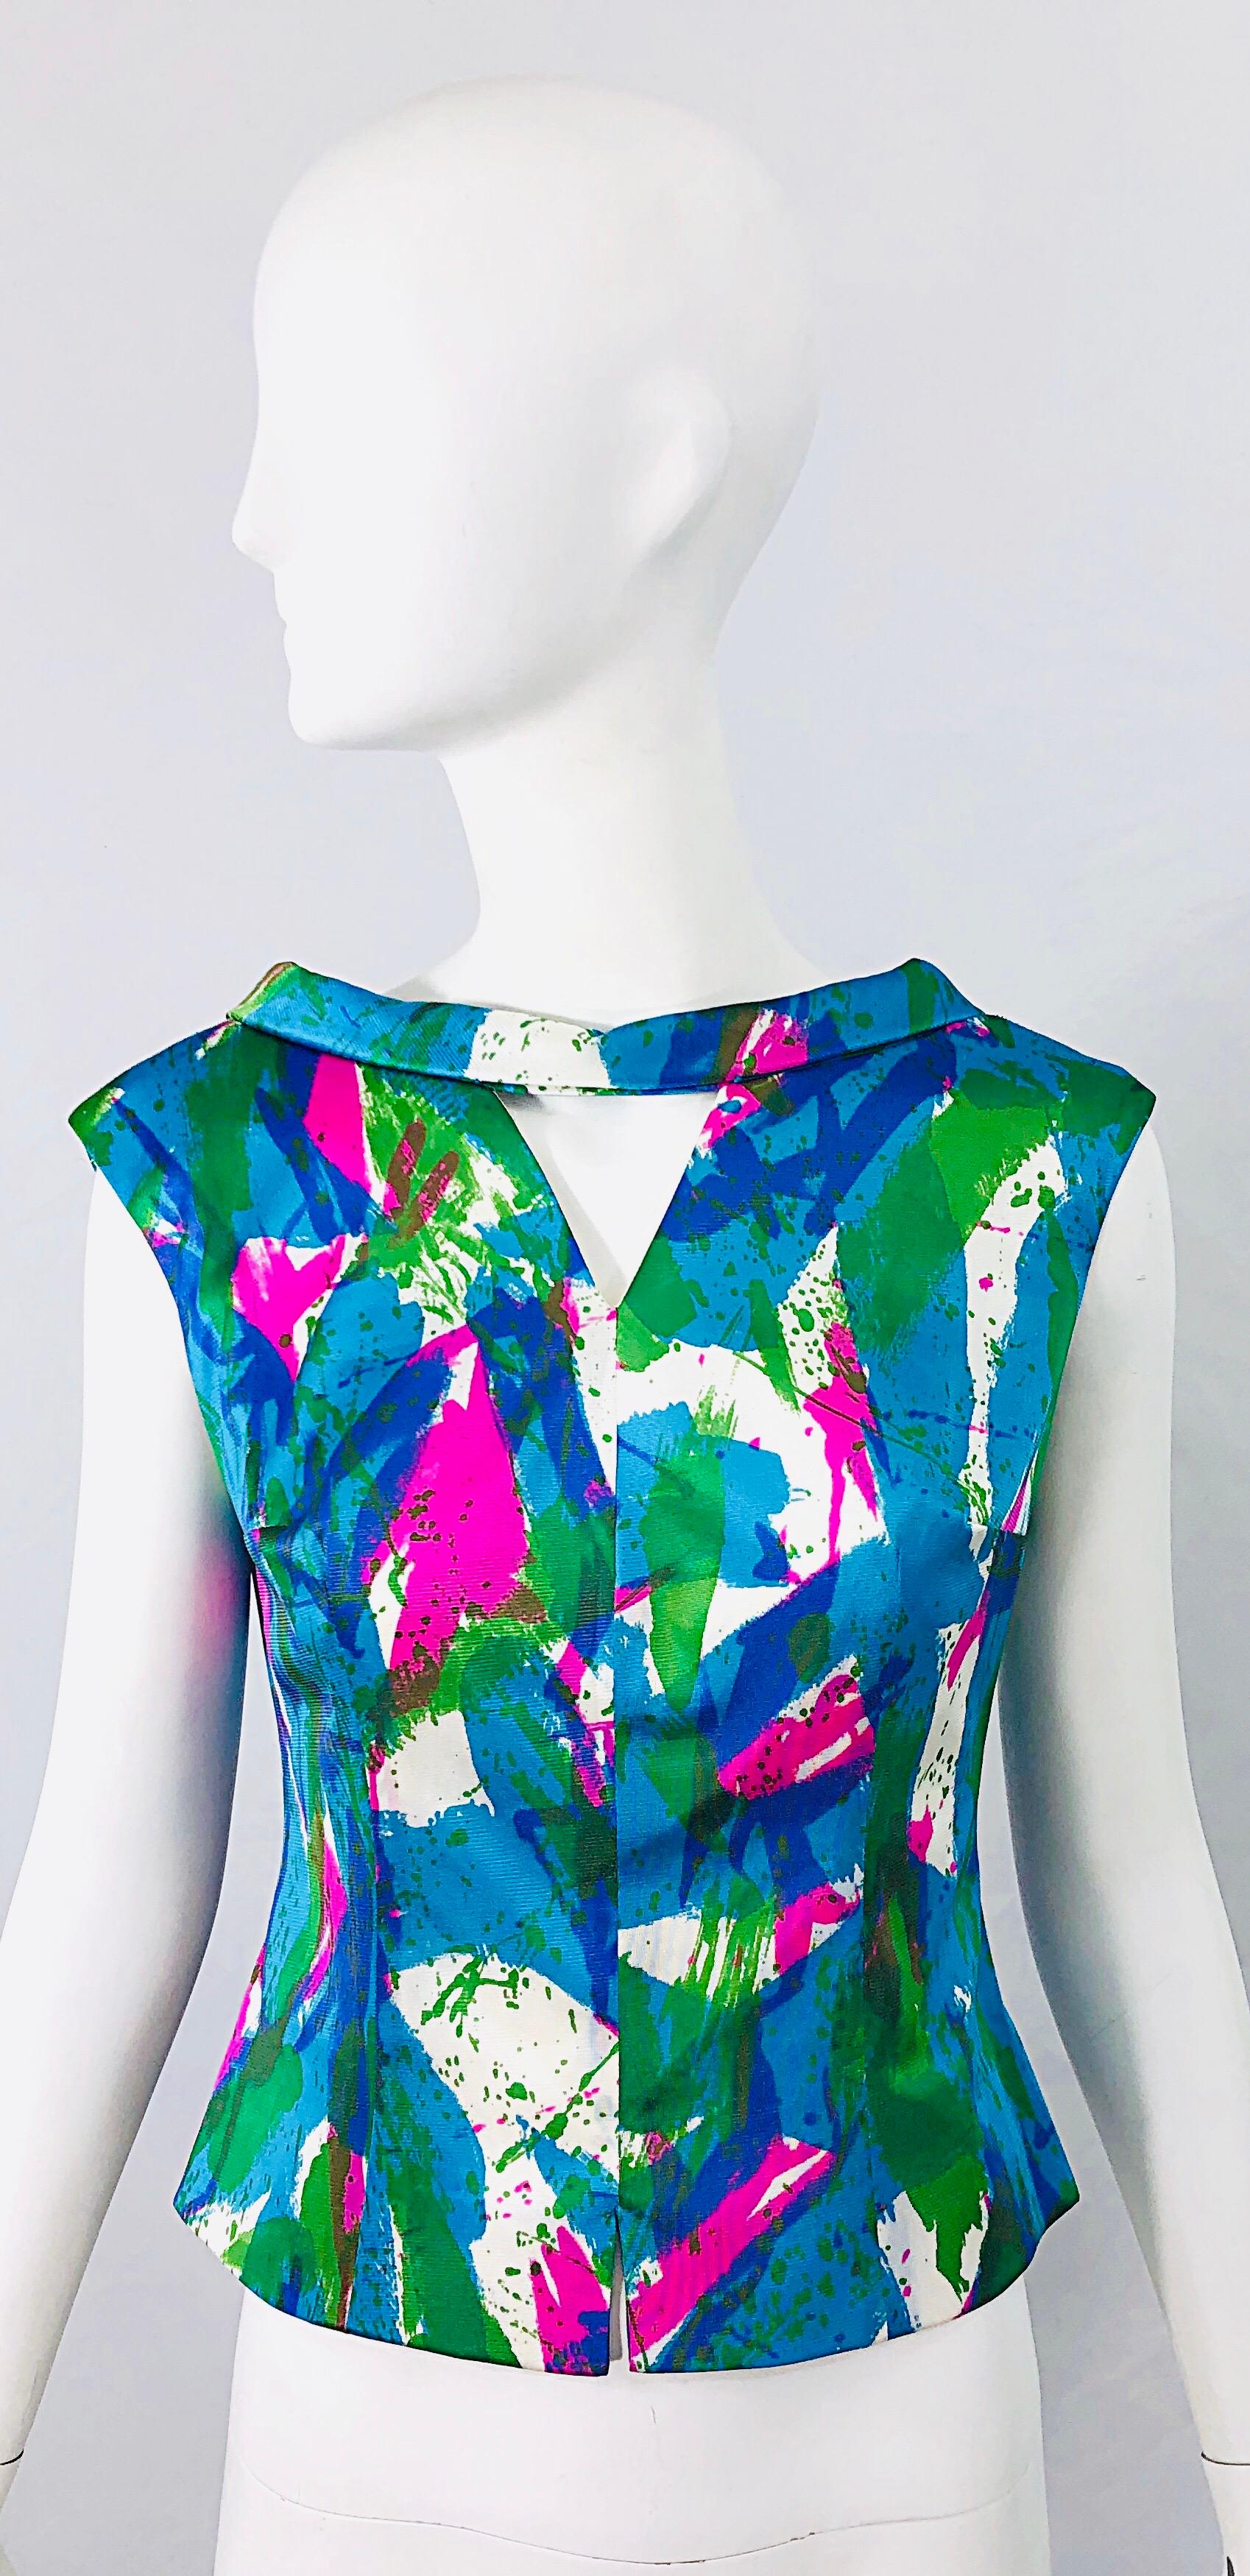 Chic 1960s Neon Abstract Print Two Piece Vintage 60s Sheath Dress + Top Blouse  For Sale 8